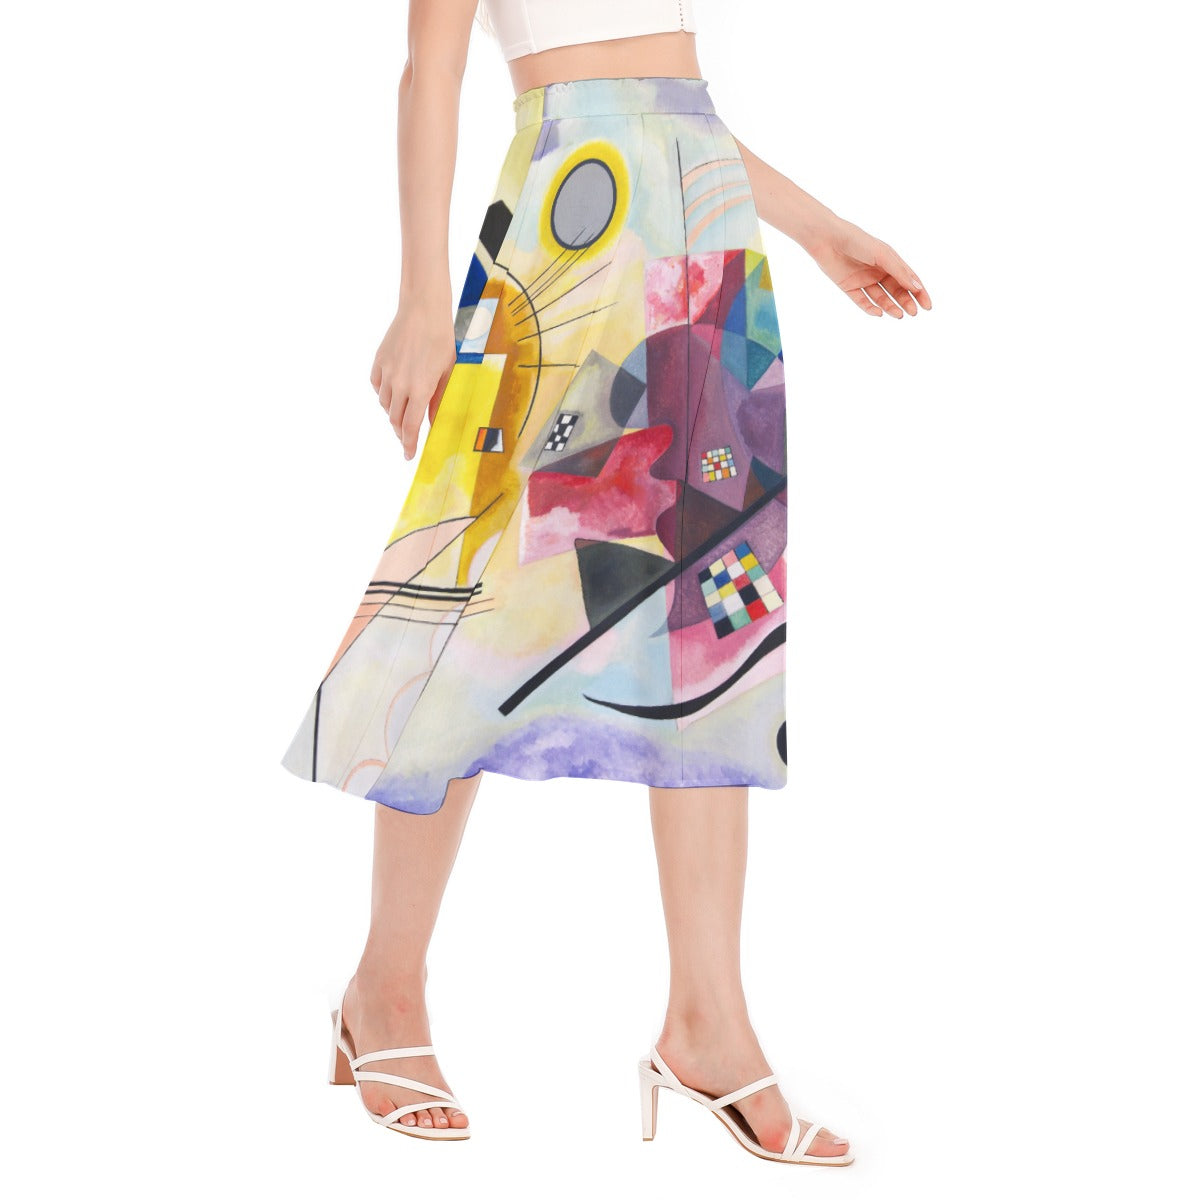 Flowing chiffon skirt in yellow, red, and blue